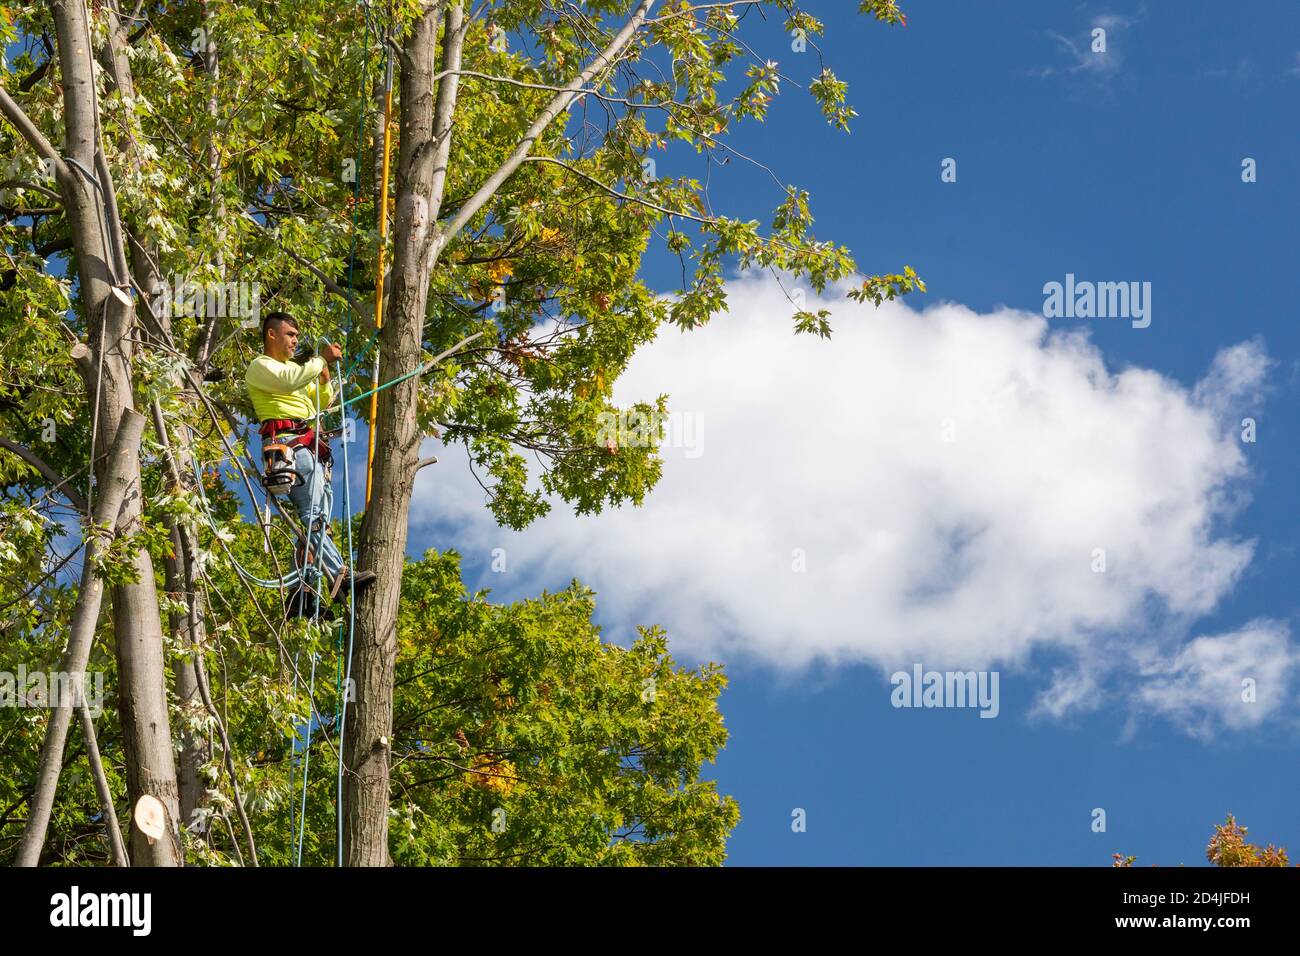 Detroit, Michigan - Tree removal in a residential neighborhood. Stock Photo